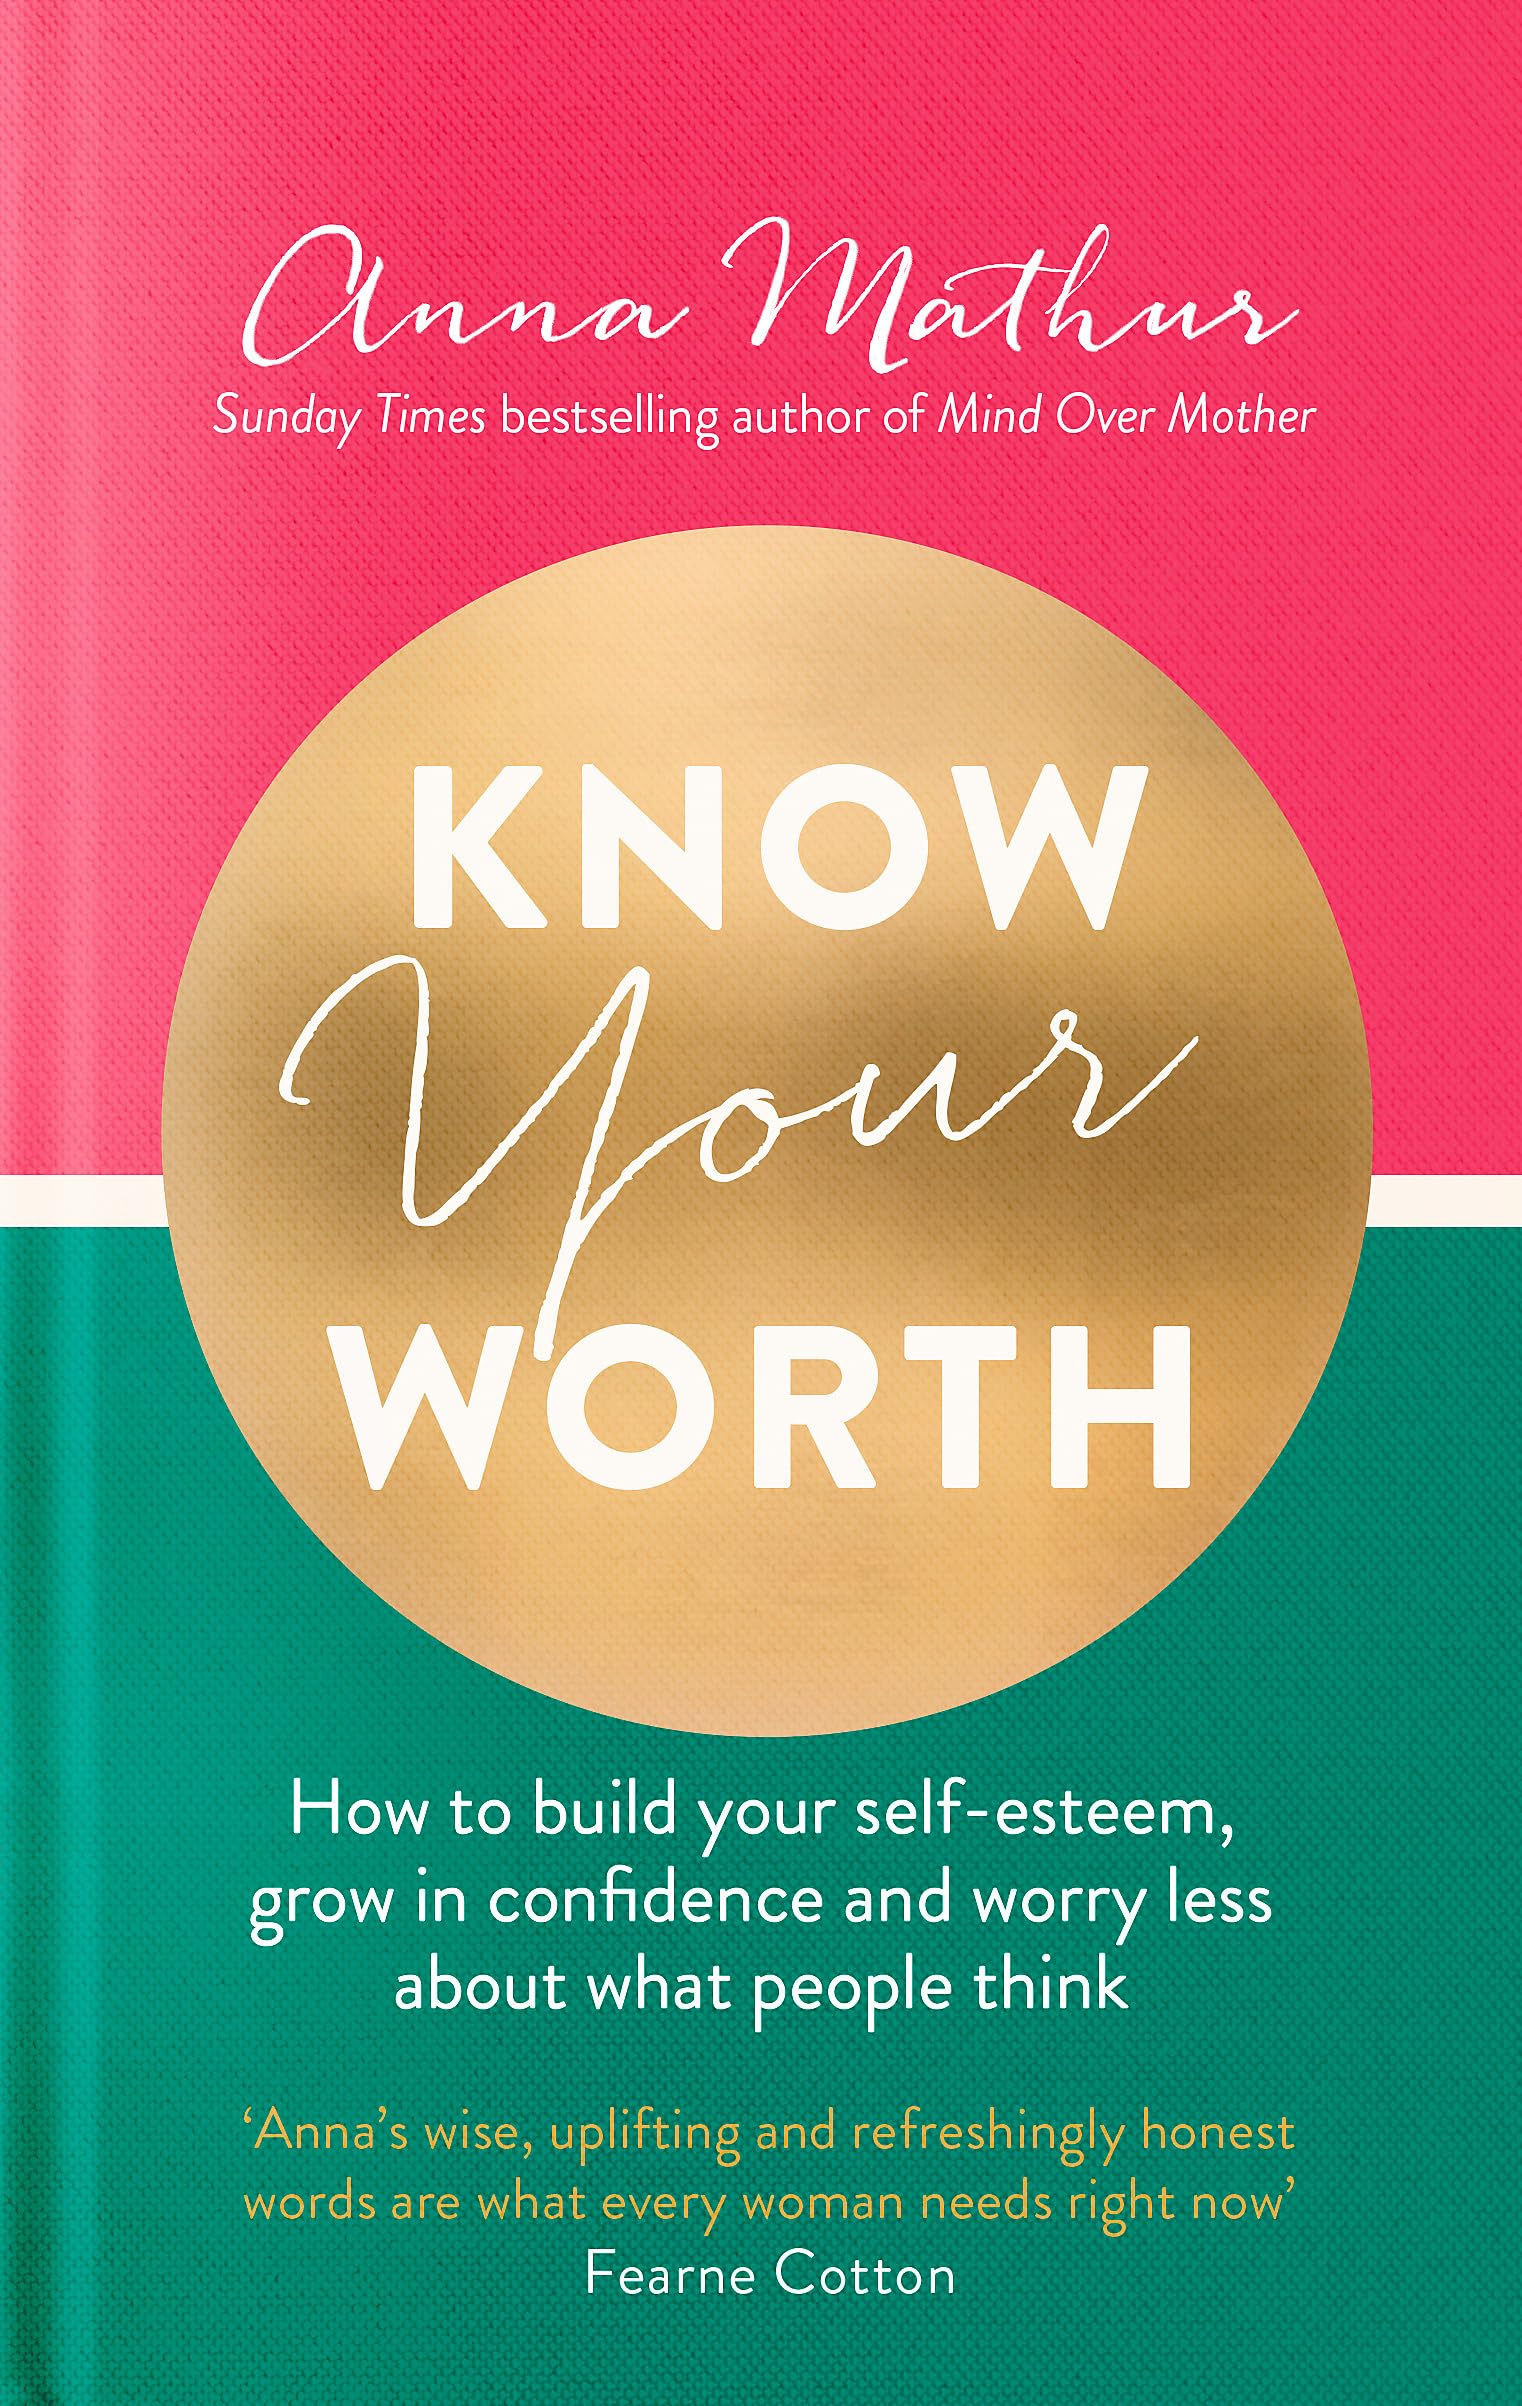 Know Your Worth book cover | books about self-worth